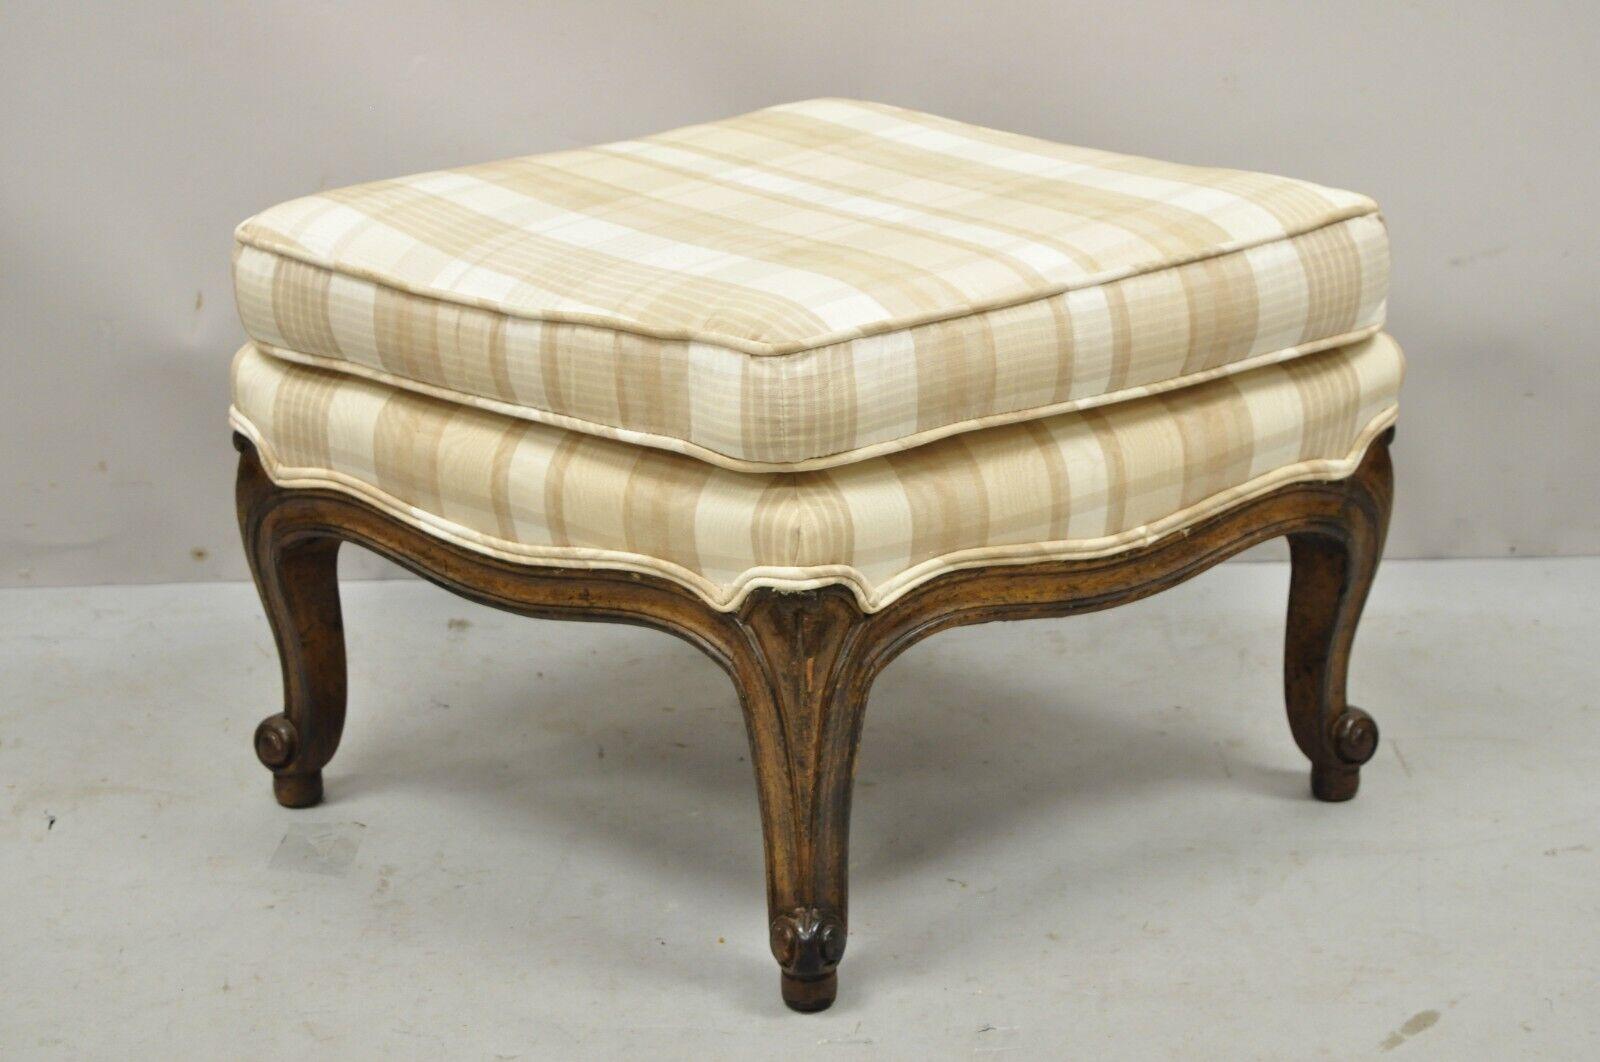 Vintage French Provincial Louis XV Style diamond shape footstool ottoman. Item features unique diamond shape, solid wood frame, distressed finish, nicely carved details, cabriole, great style and form. Circa mid 20th century. Measurements: 15